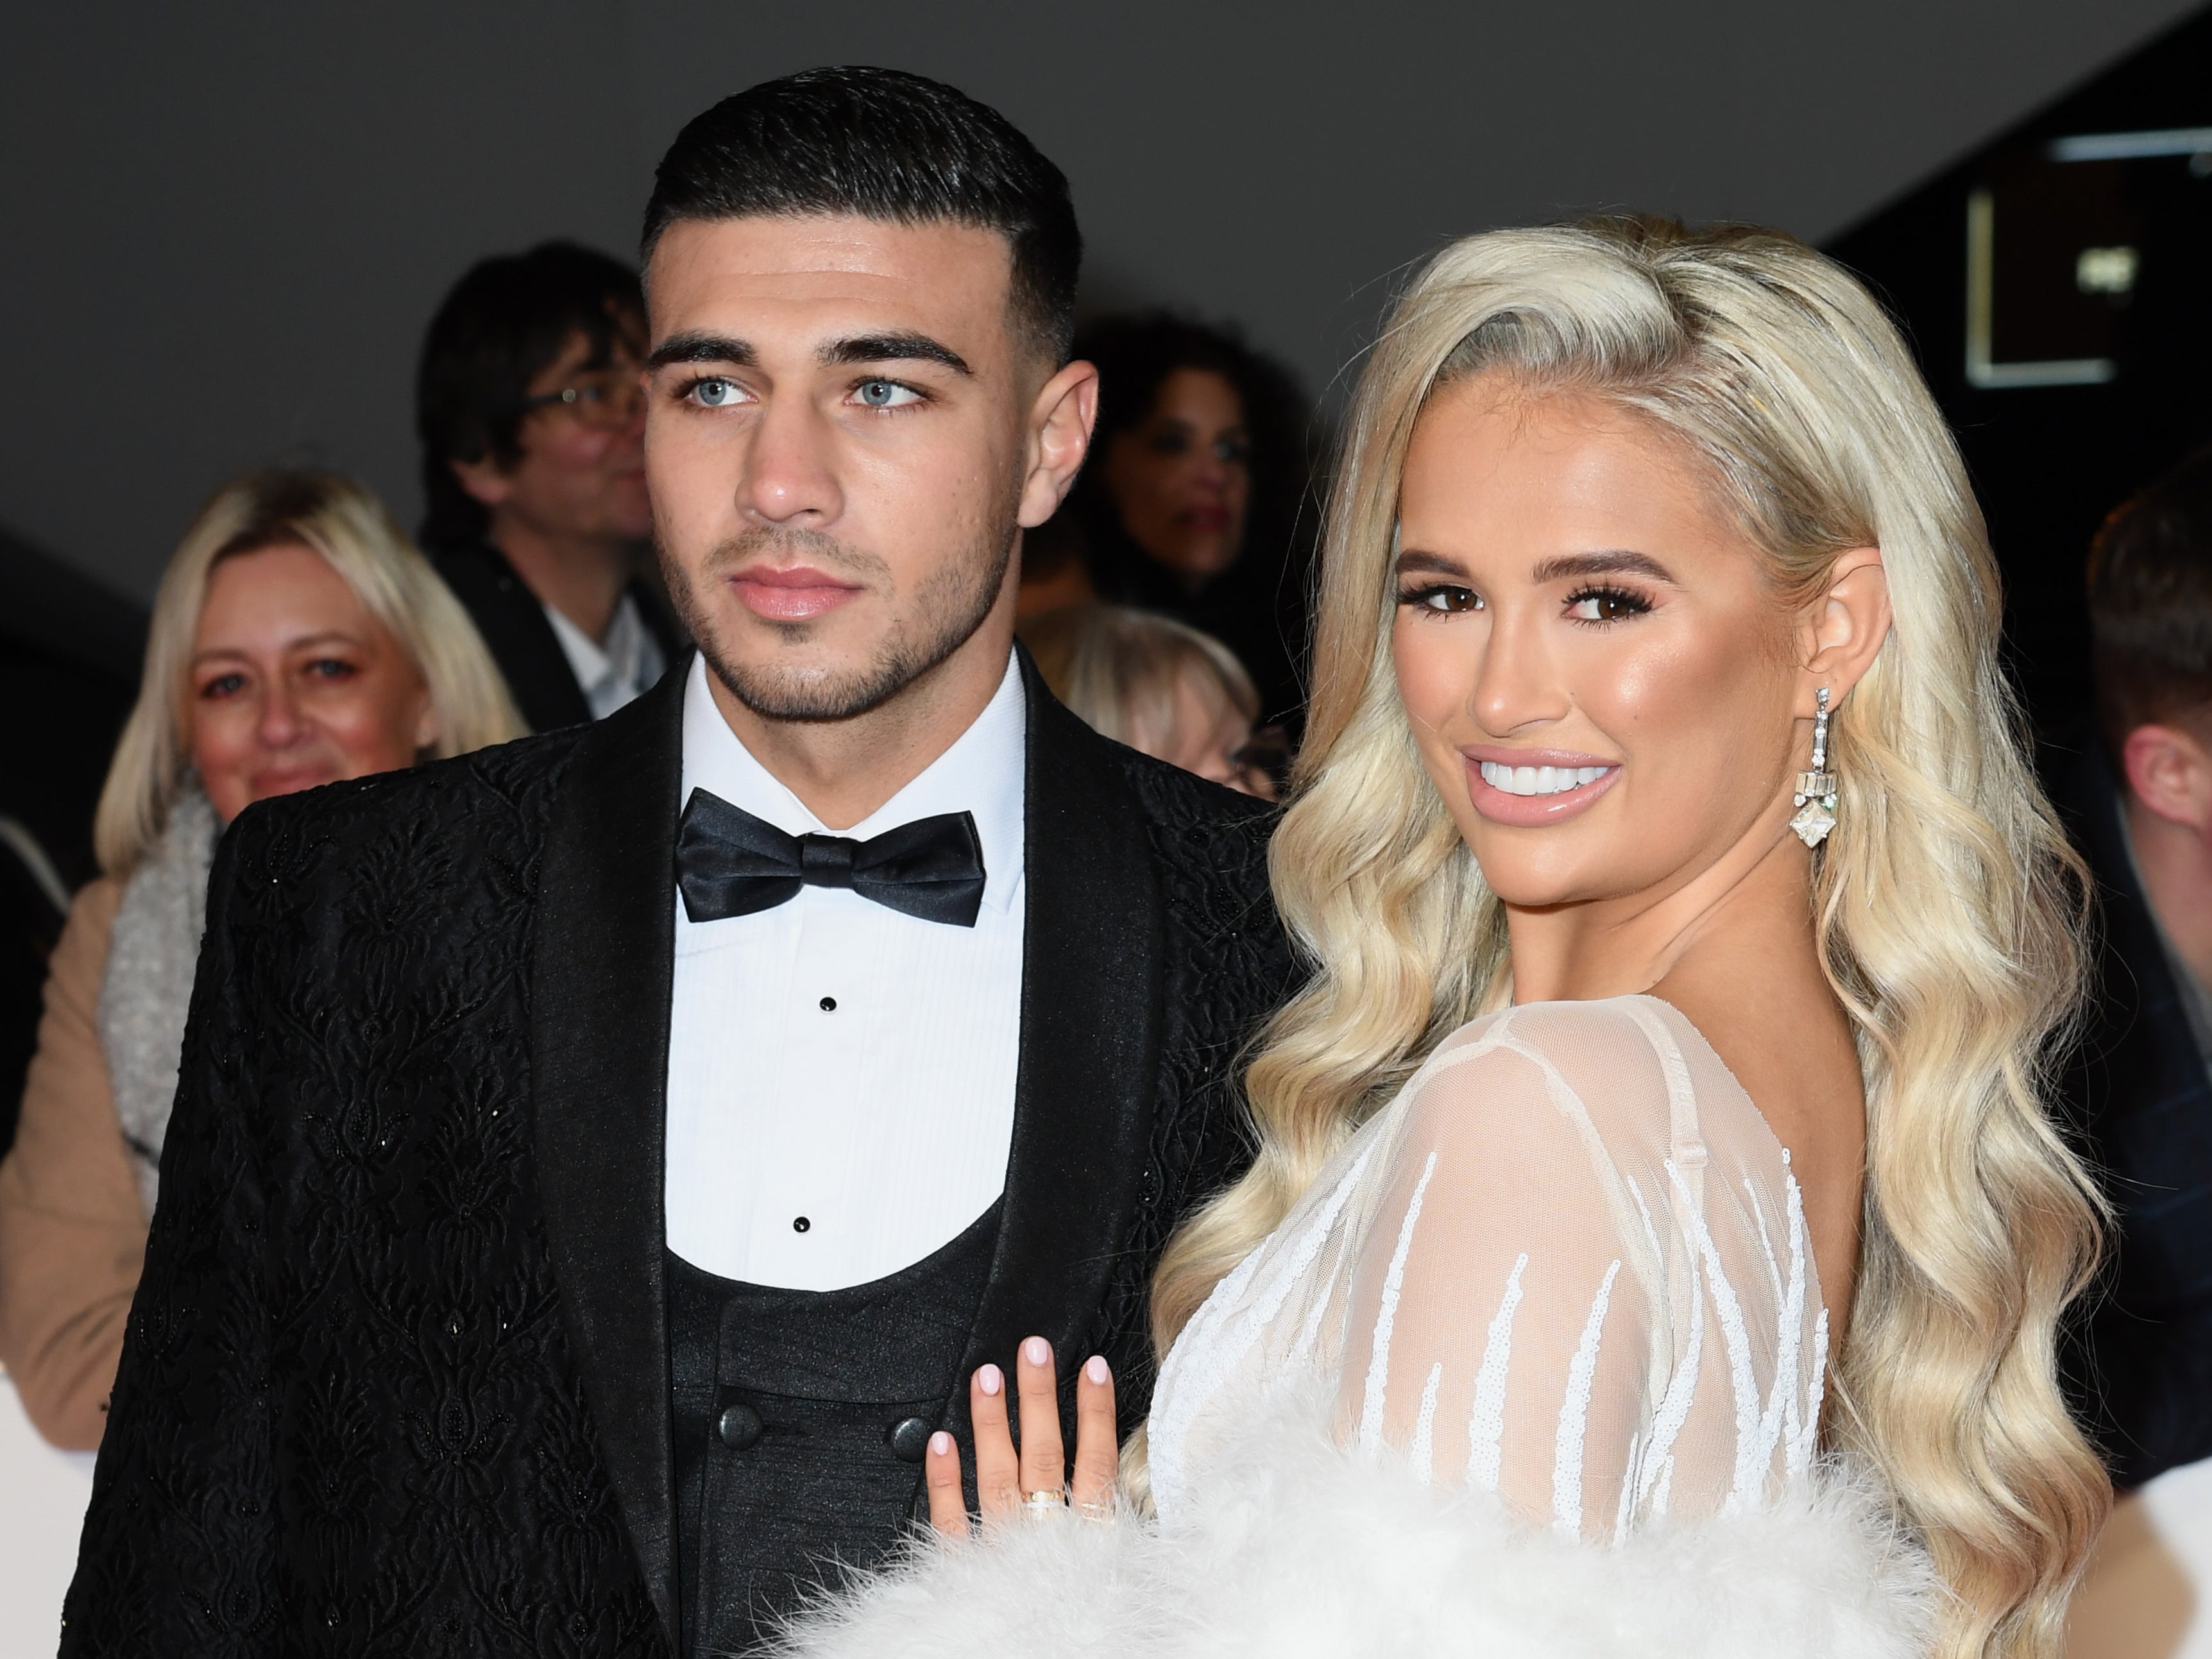 The pair have been together since 2019, after meeting on Love Island